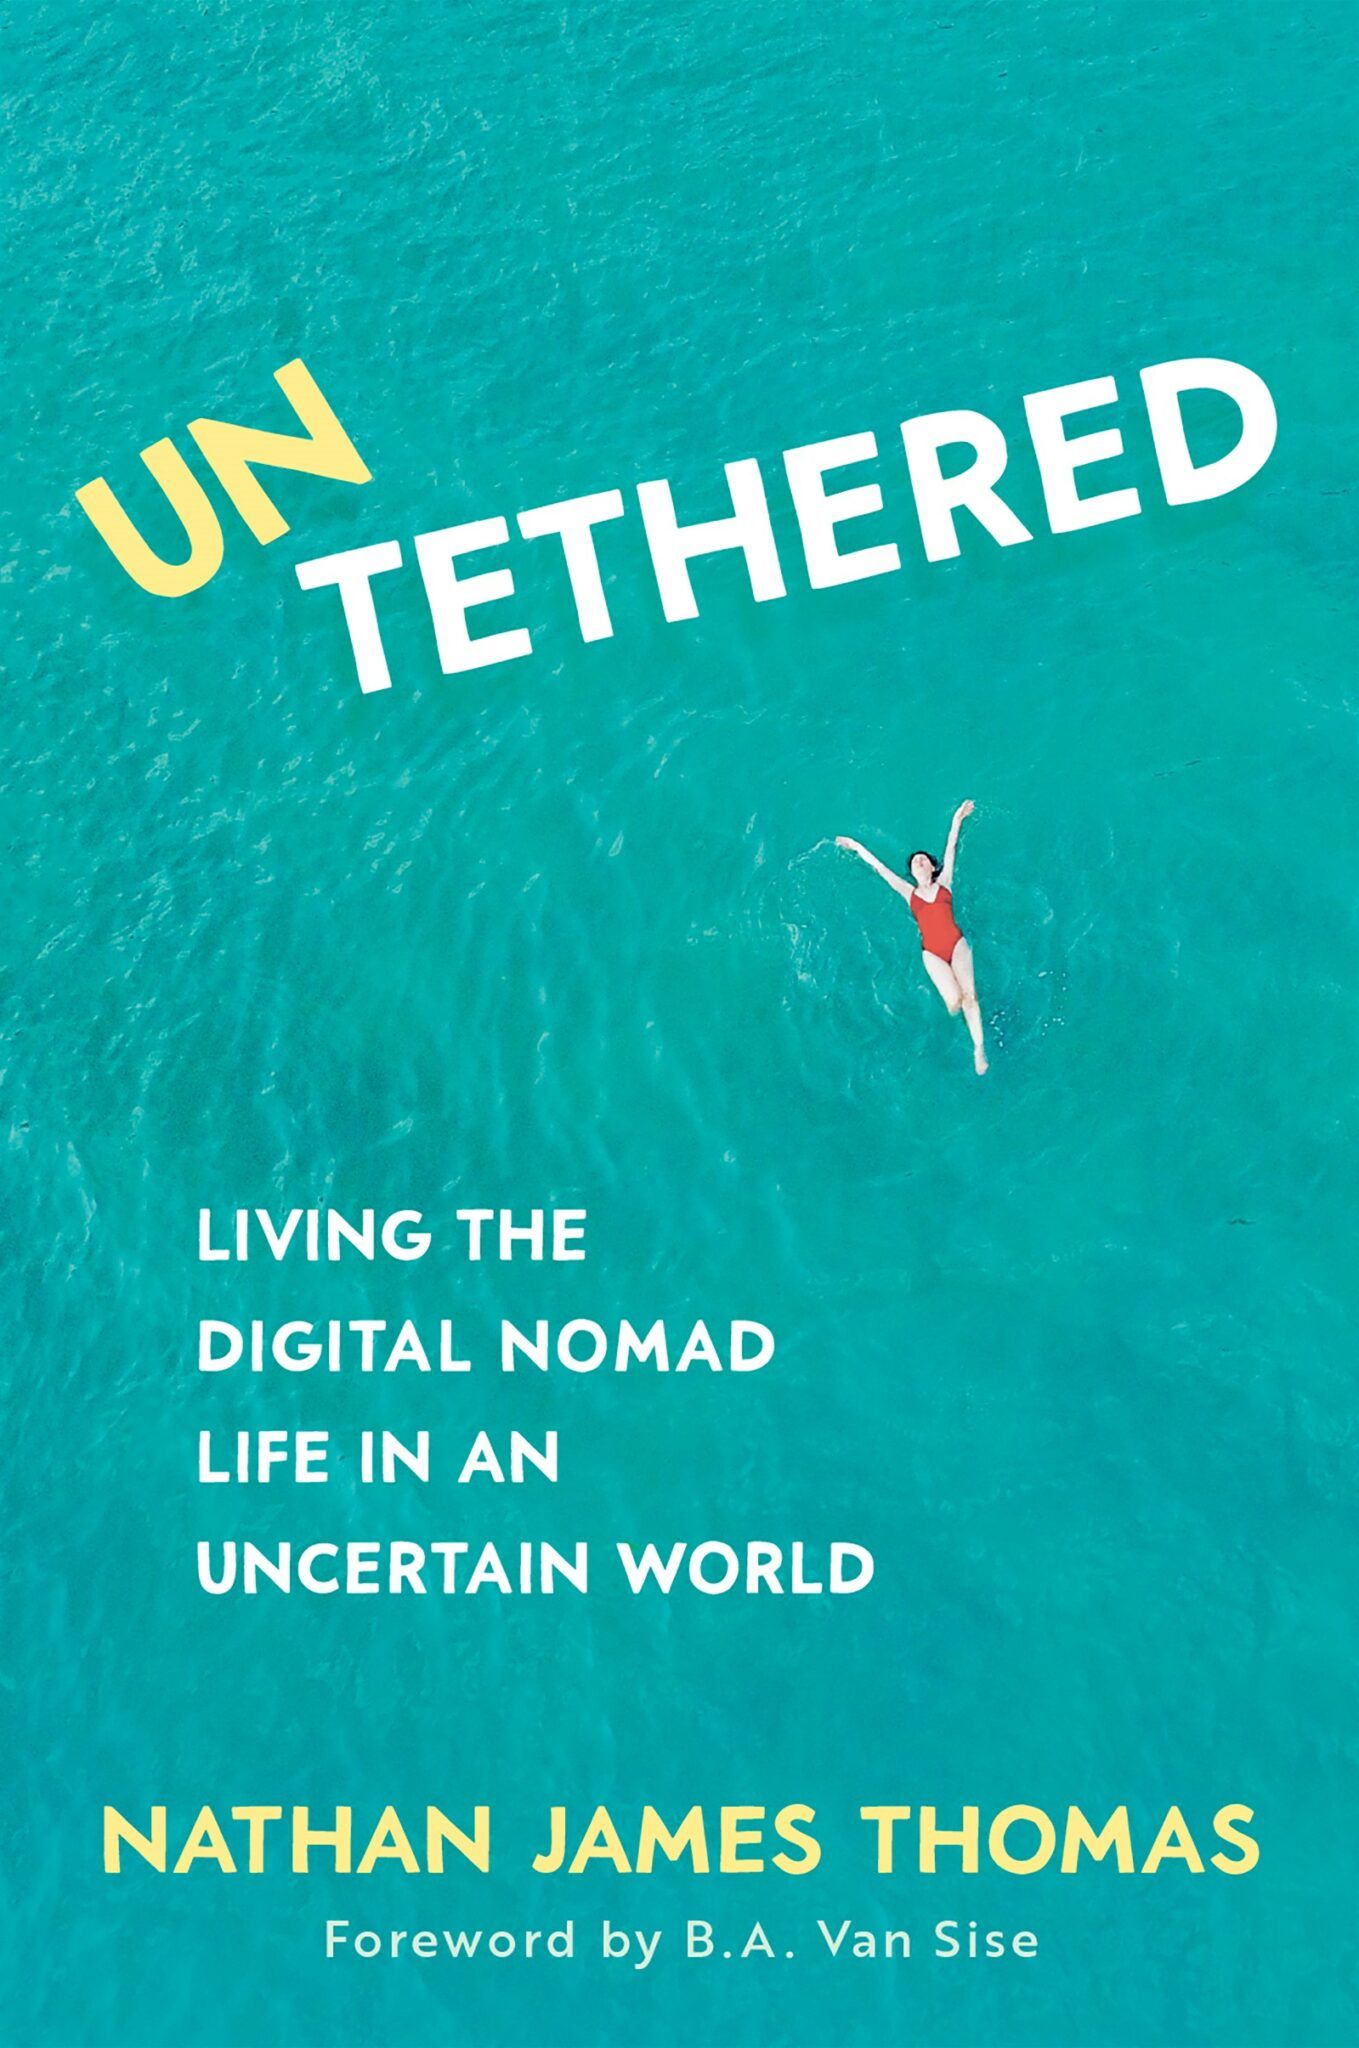 a book called un tethered by nathan james thomas